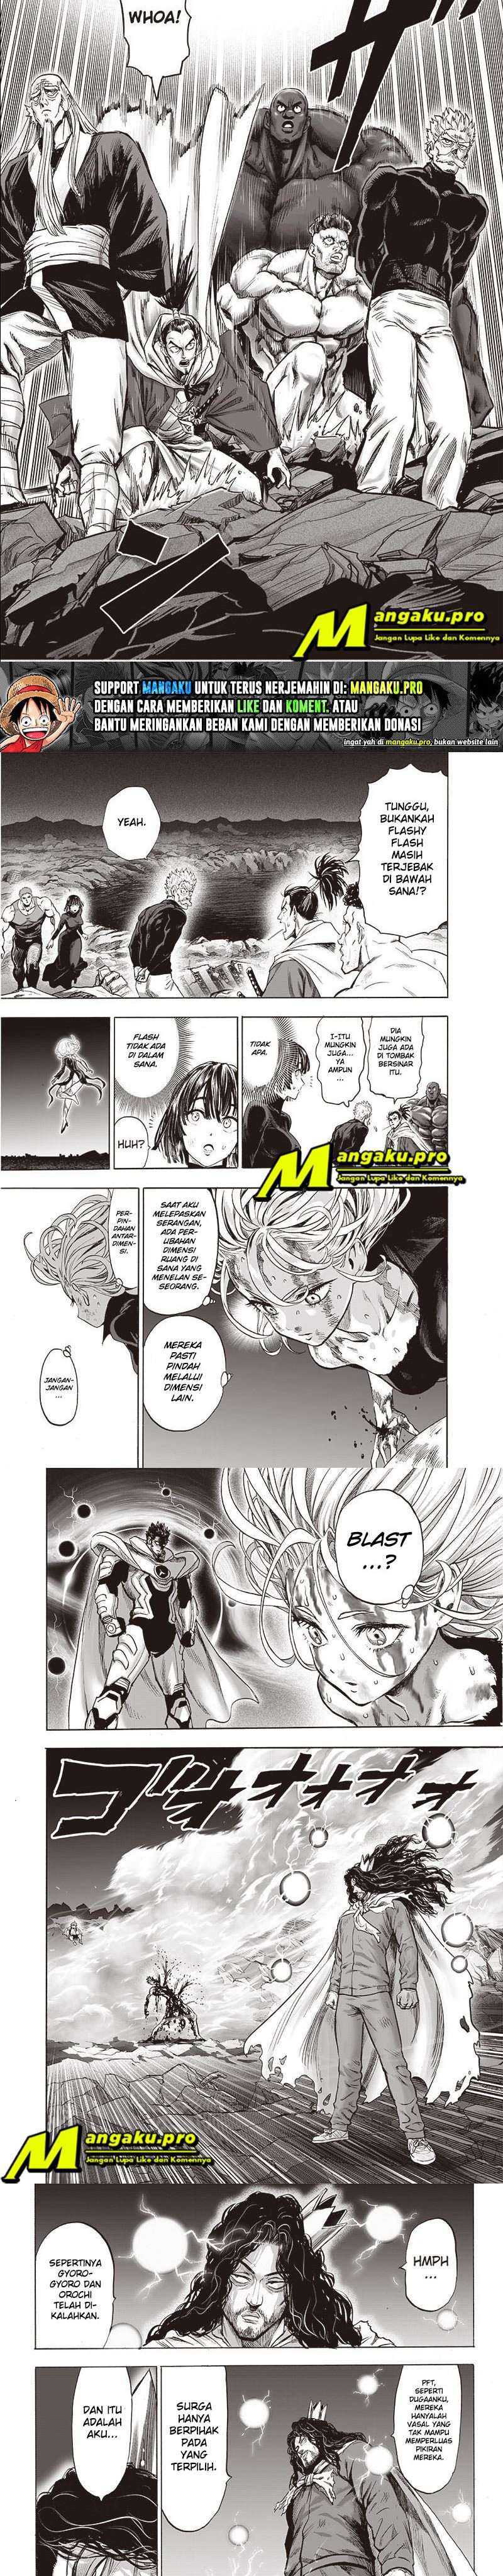 One Punch Man Chapter 191